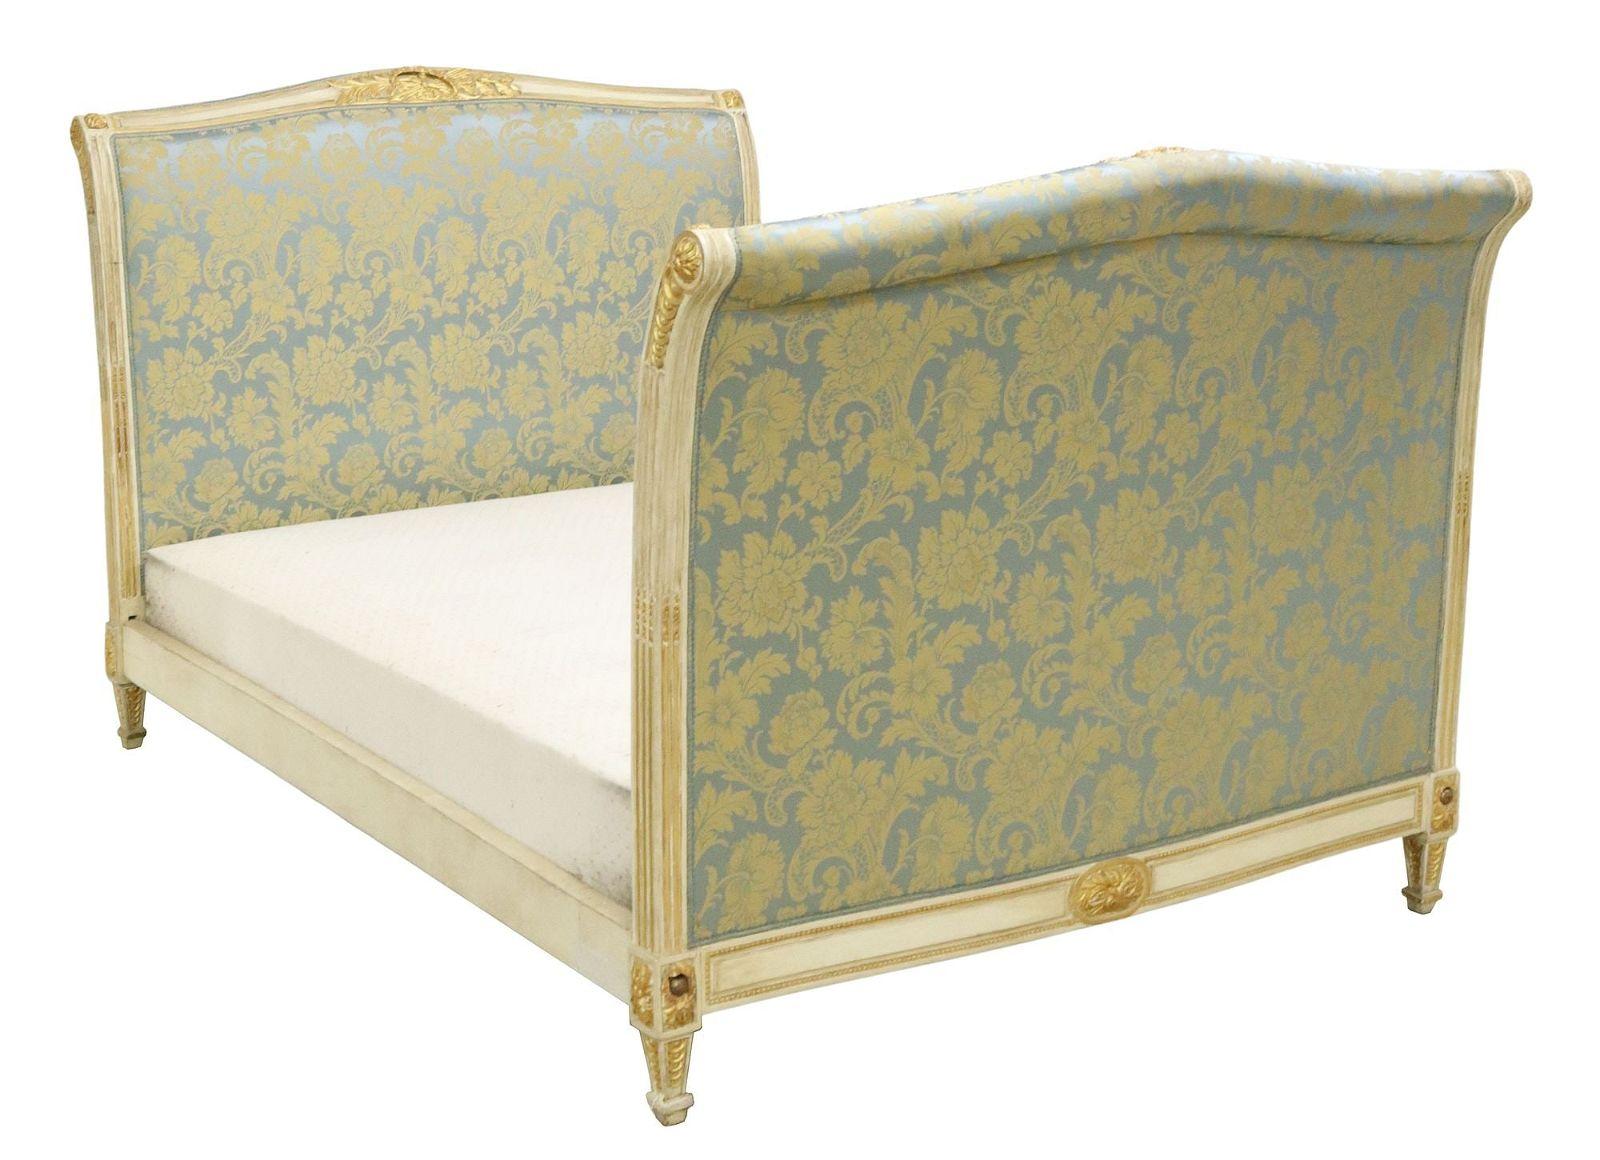 French Louis XVI style alcove bed, 20th c., having white and gilt painted wood frame, in later floral-patterned upholstery, with ribbon trim, rising on squared and tapered supports, loss to upholstery at right side rail.
Mattress not